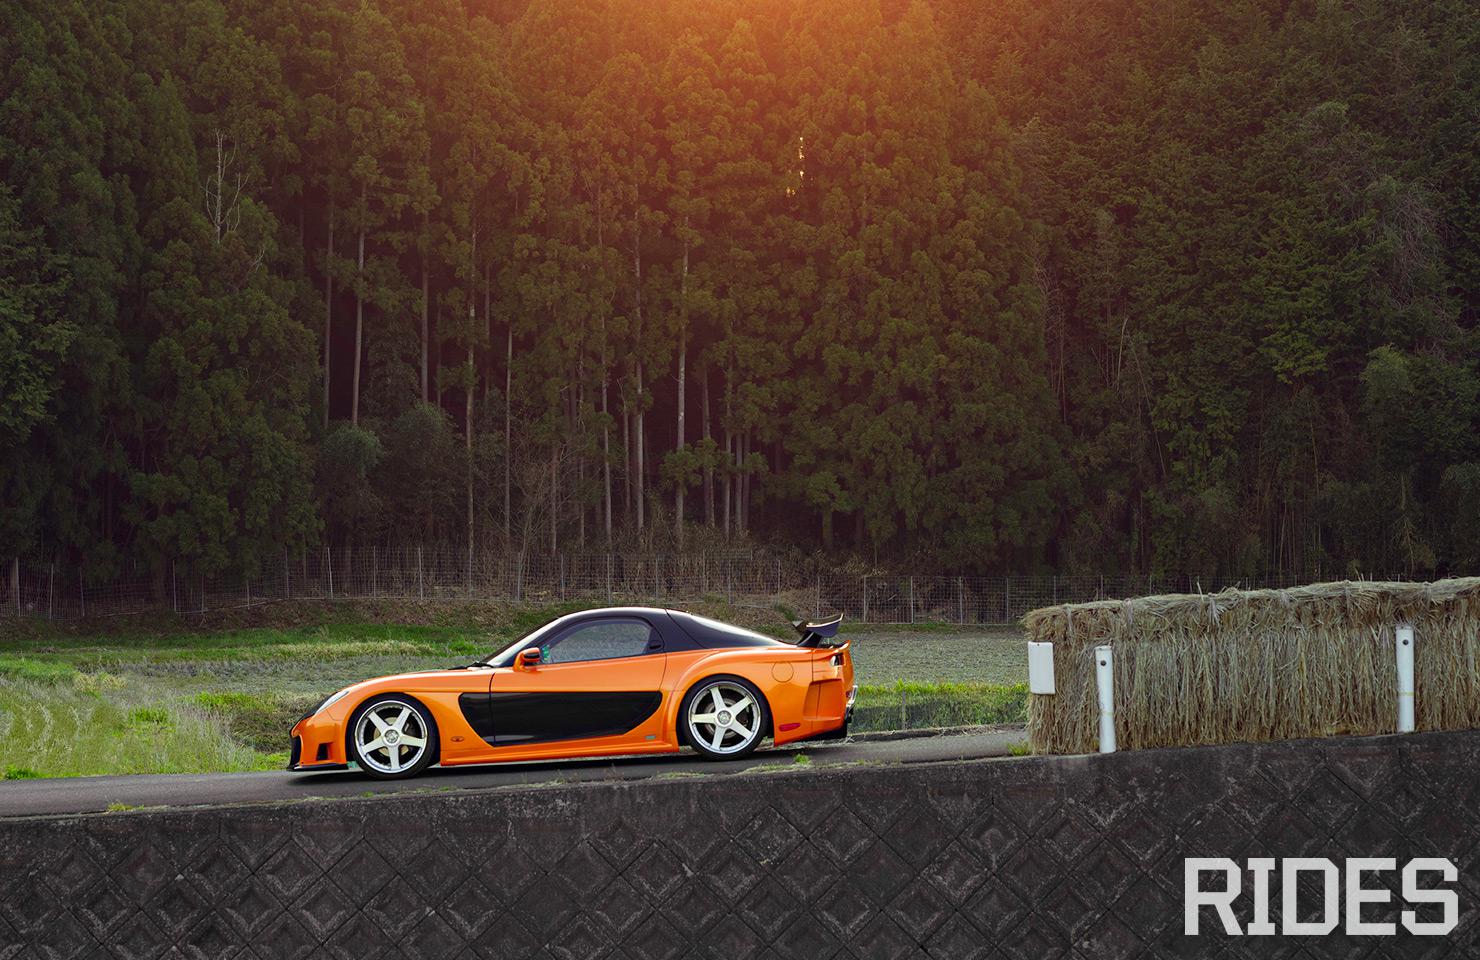 Mazda rx7 - (#99813) - High Quality and Resolution Wallpapers on ...